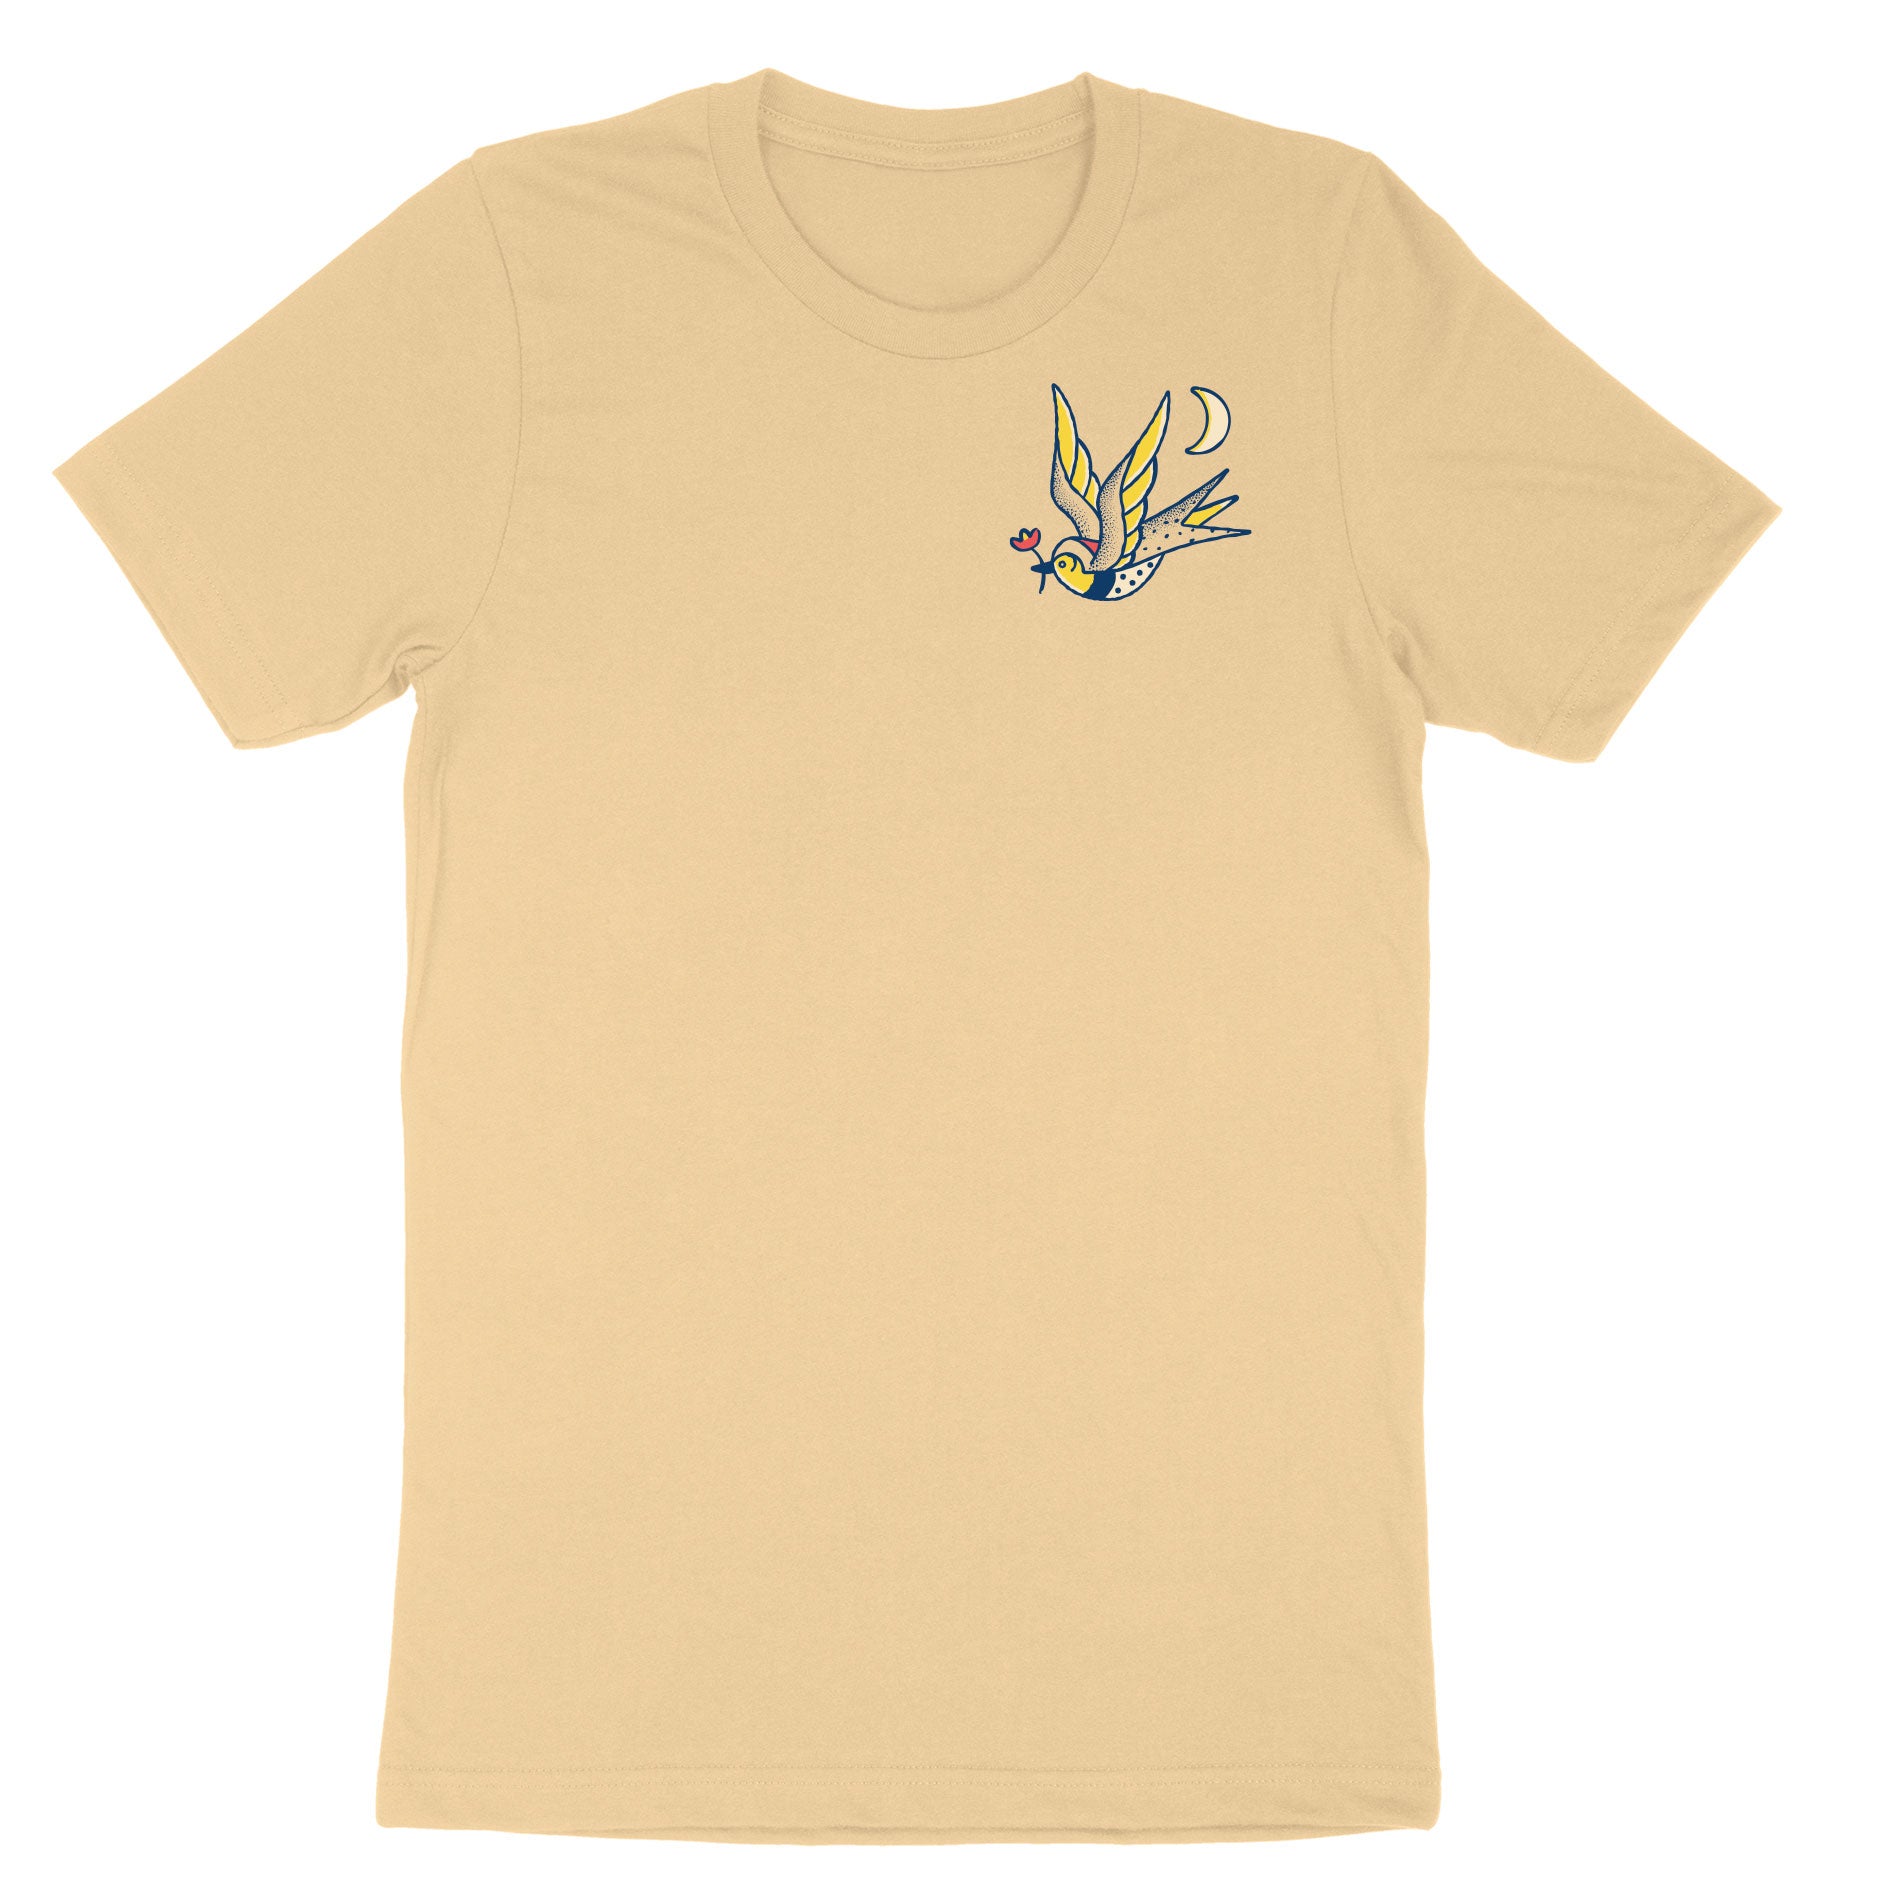 Cream t-shirt of the alabama state bird holding the alabama state flower drawn in american traditional tattoo style